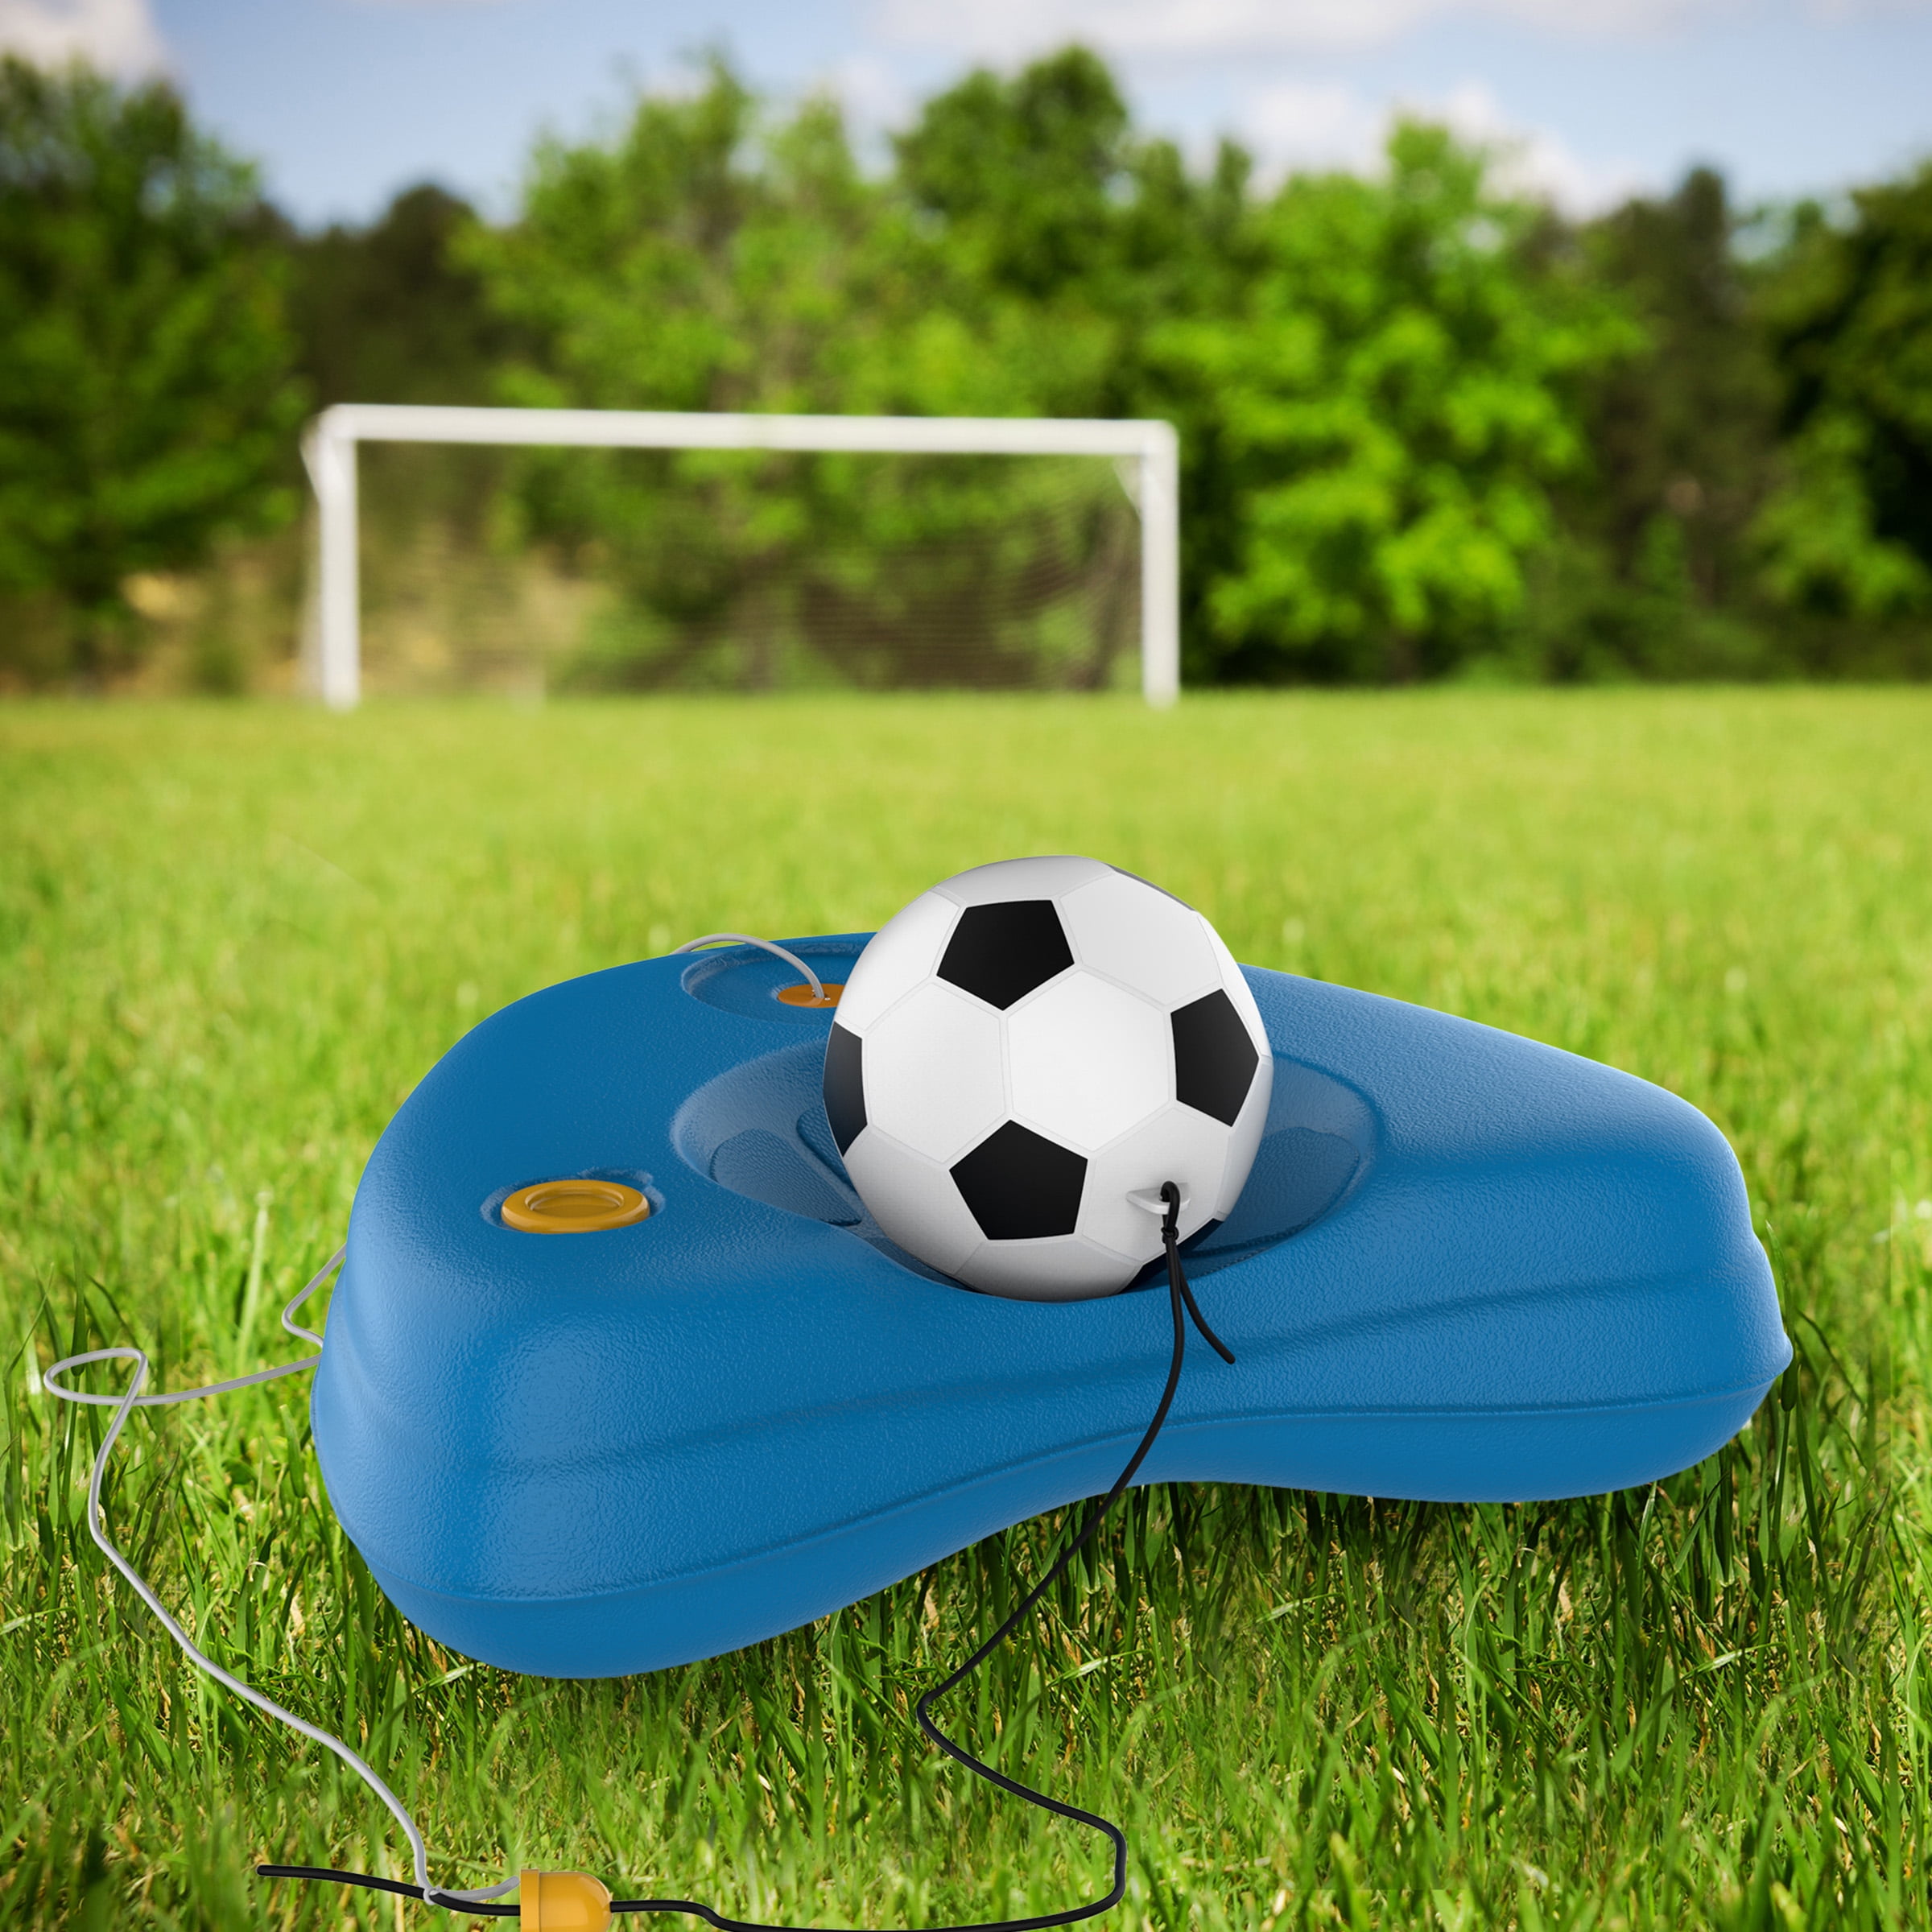 Hands-free Soccer Football Trainer Self-Training Aid Practice for Kids Child 